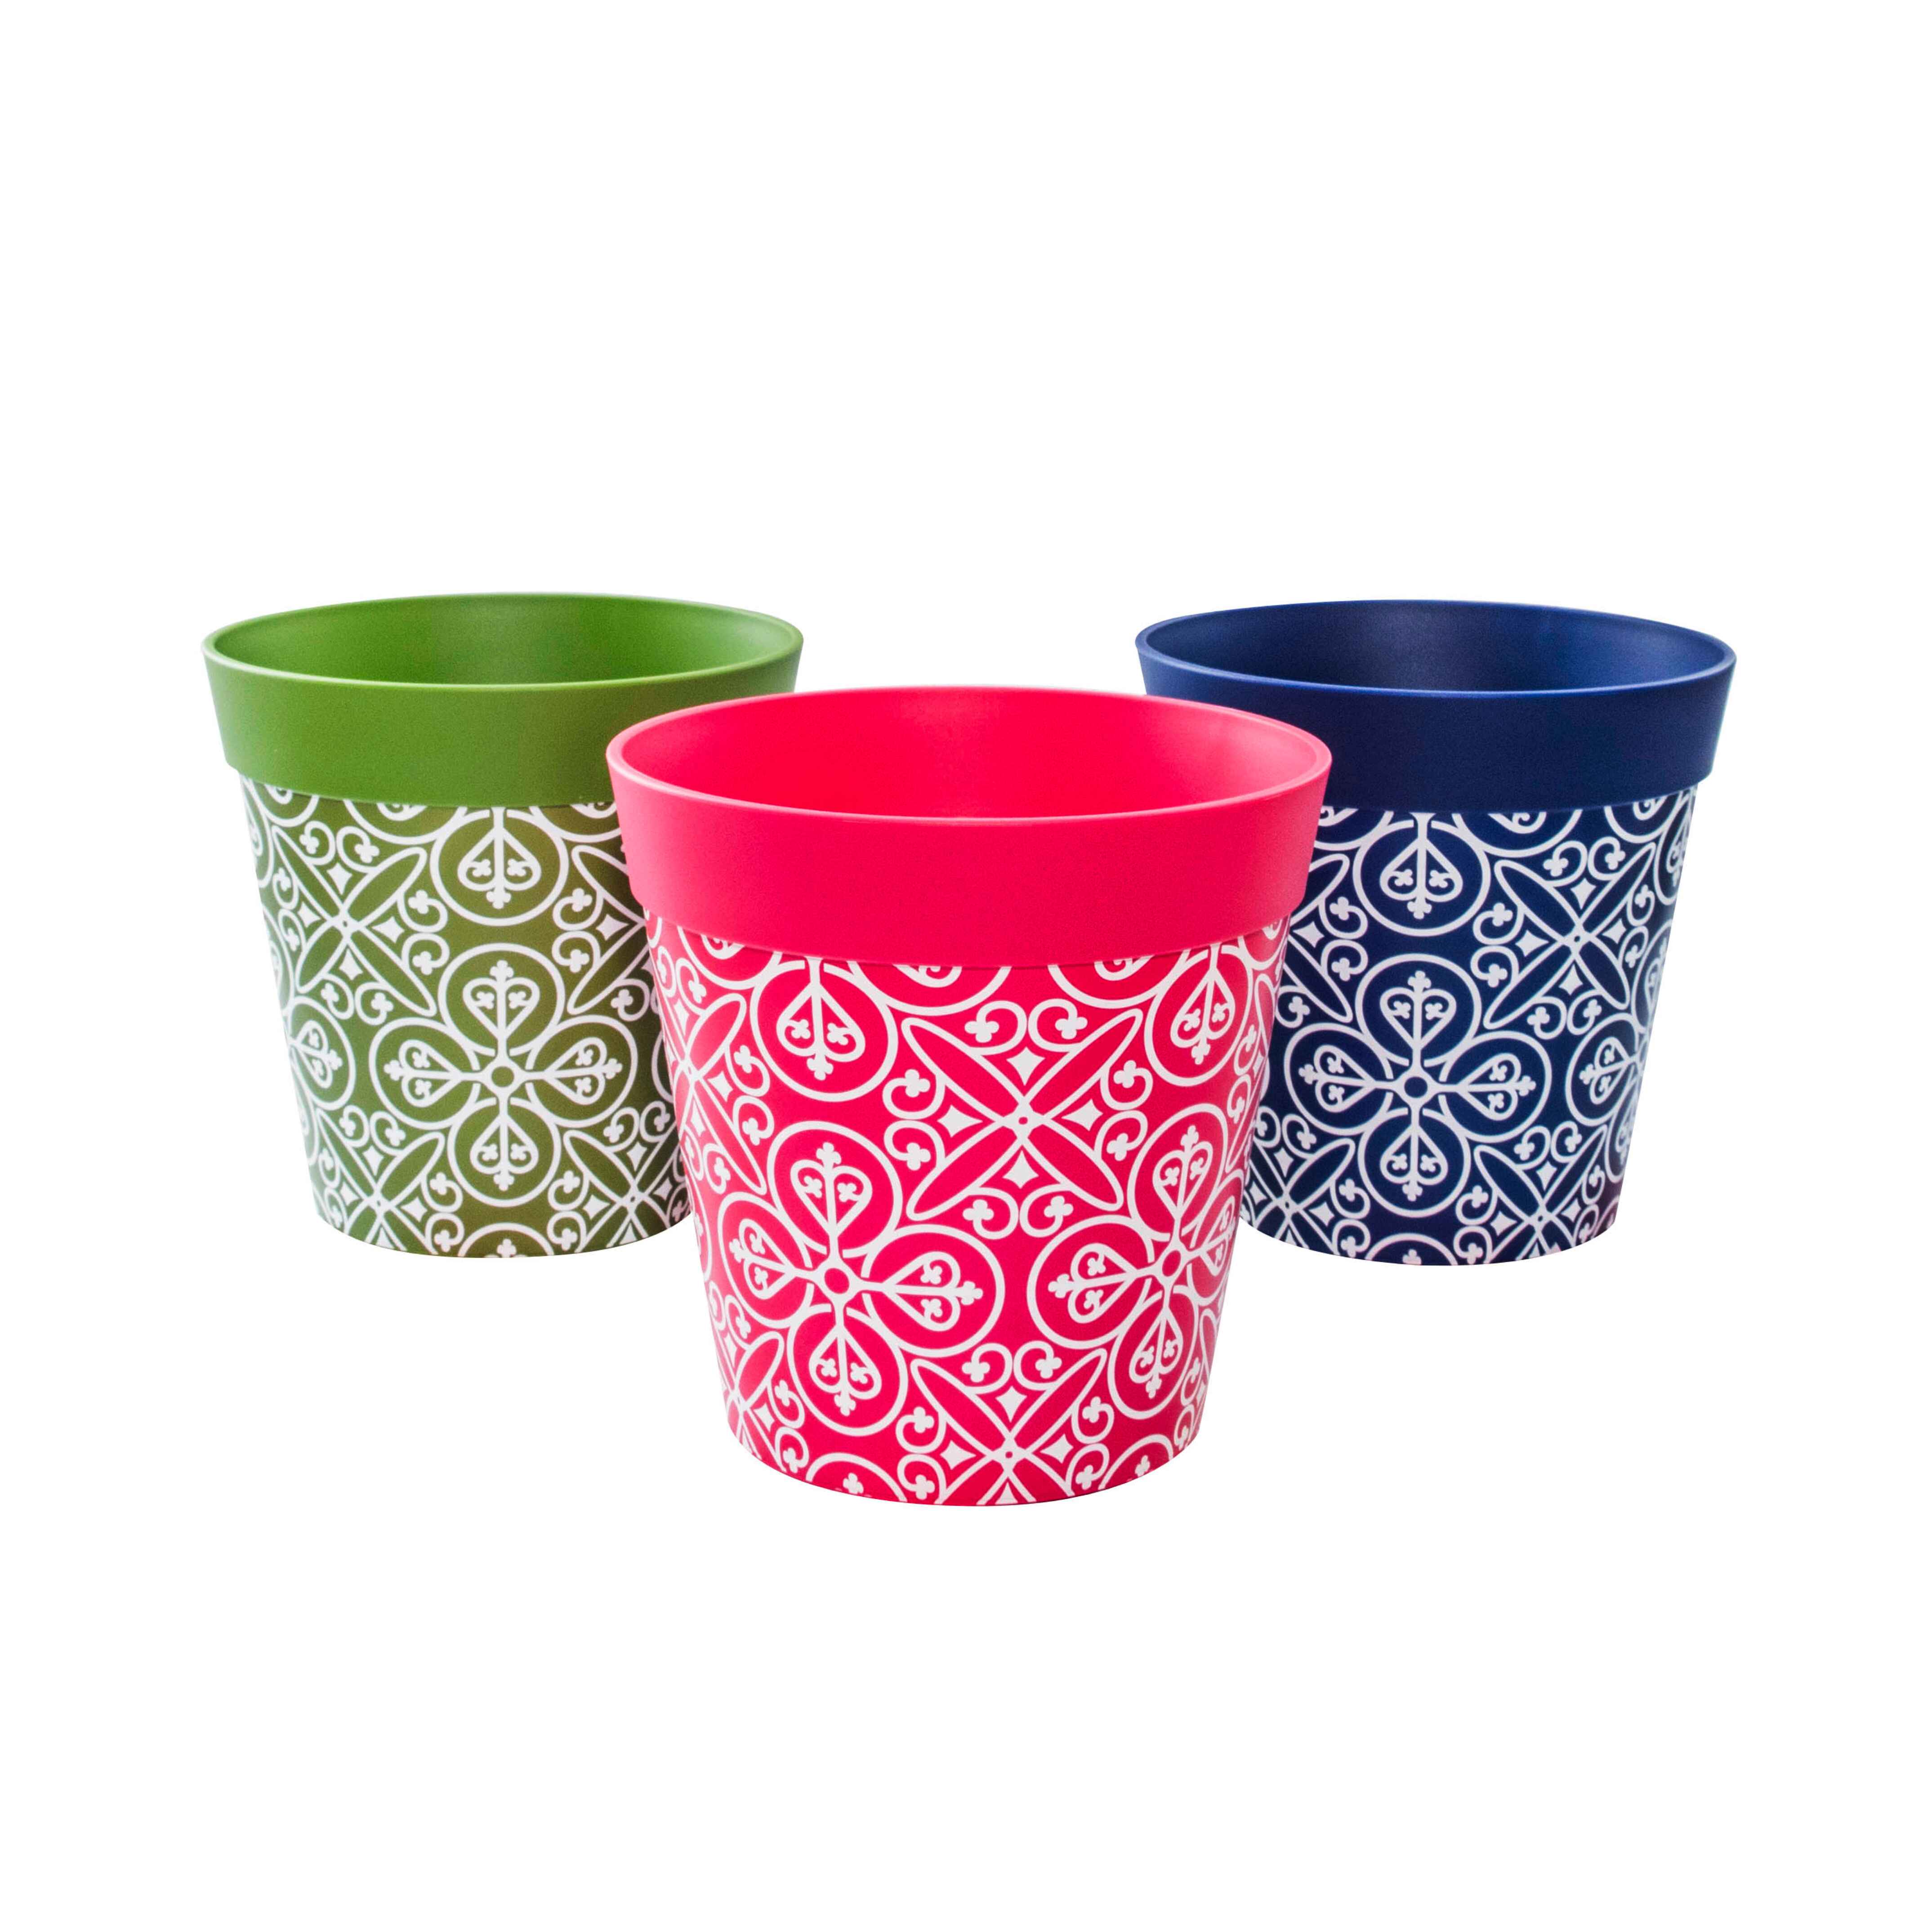 Picture of 3 Small 15cm Plastic Blue Multi Colour Moroccan Style Indoor/Outdoor Flowerpots